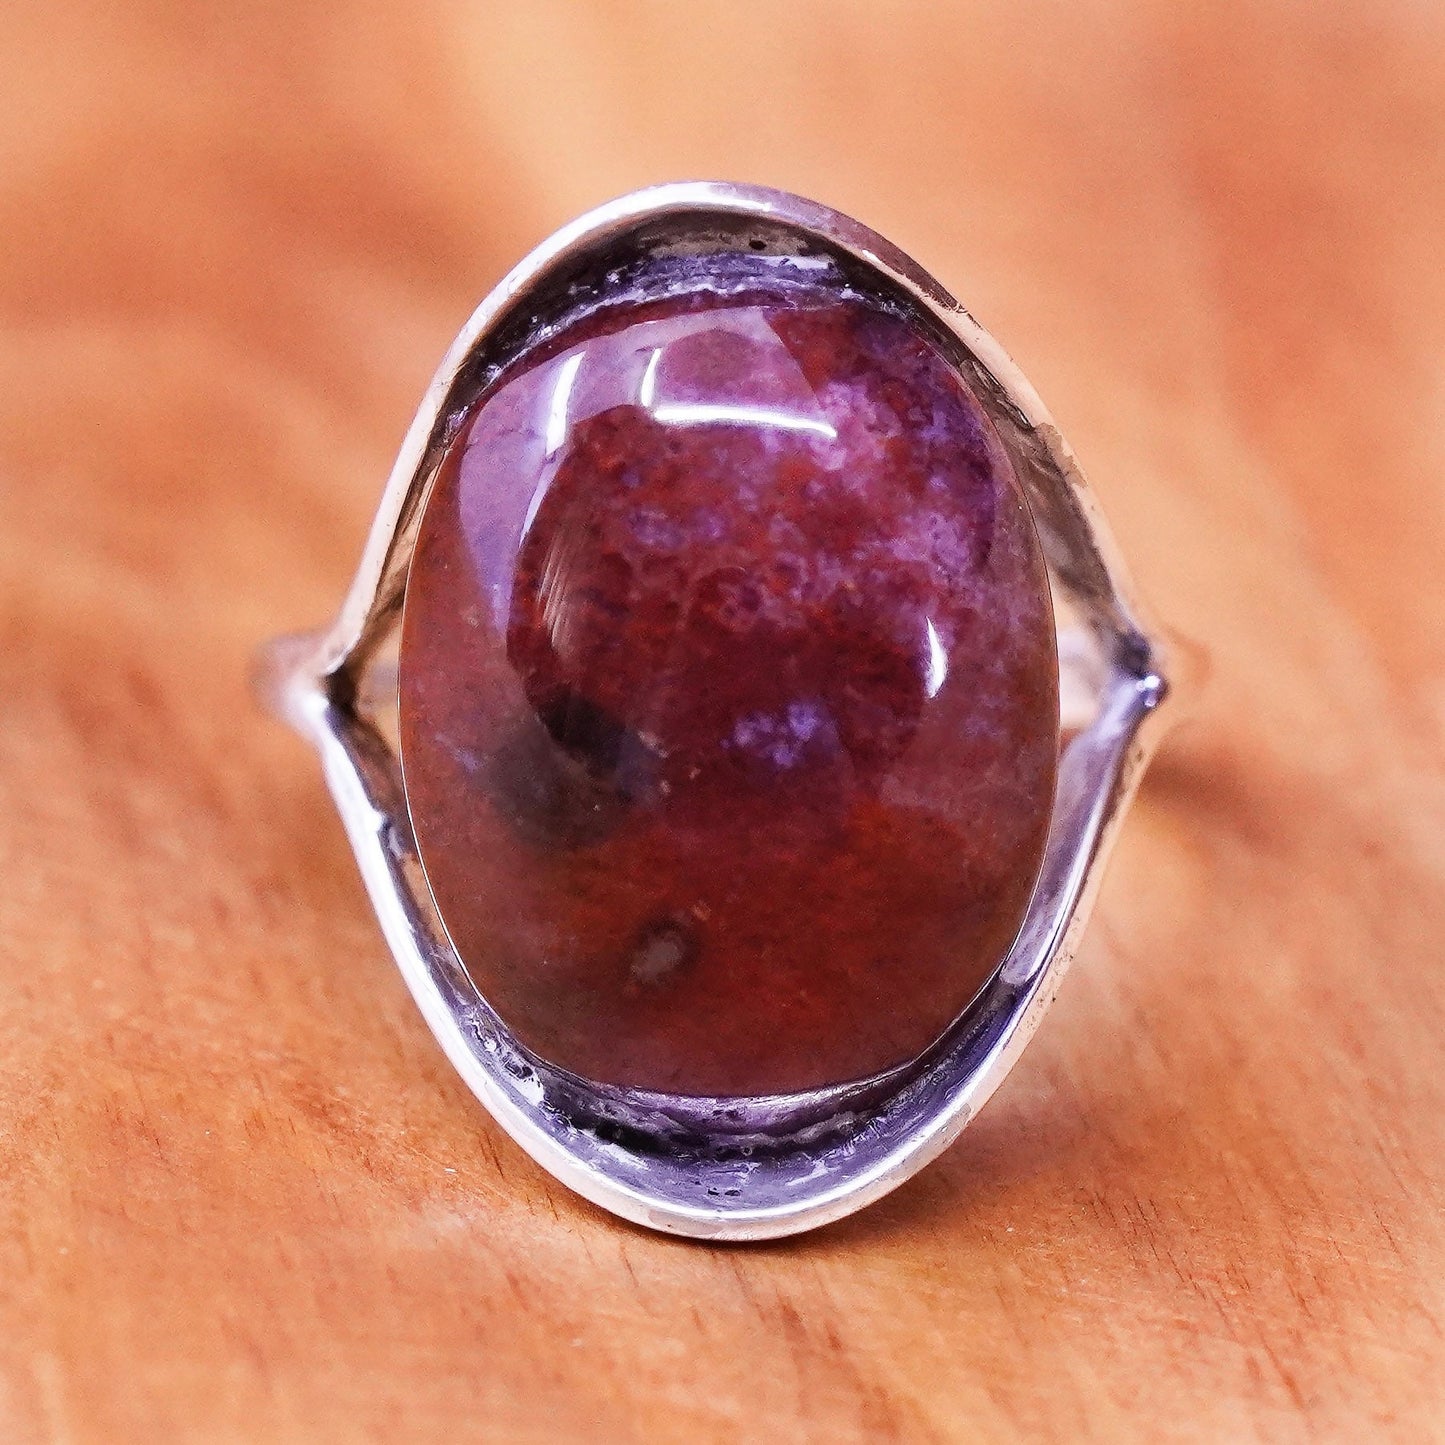 Size 5.25, vintage Mexico Sterling 925 silver handmade ring with red jasper